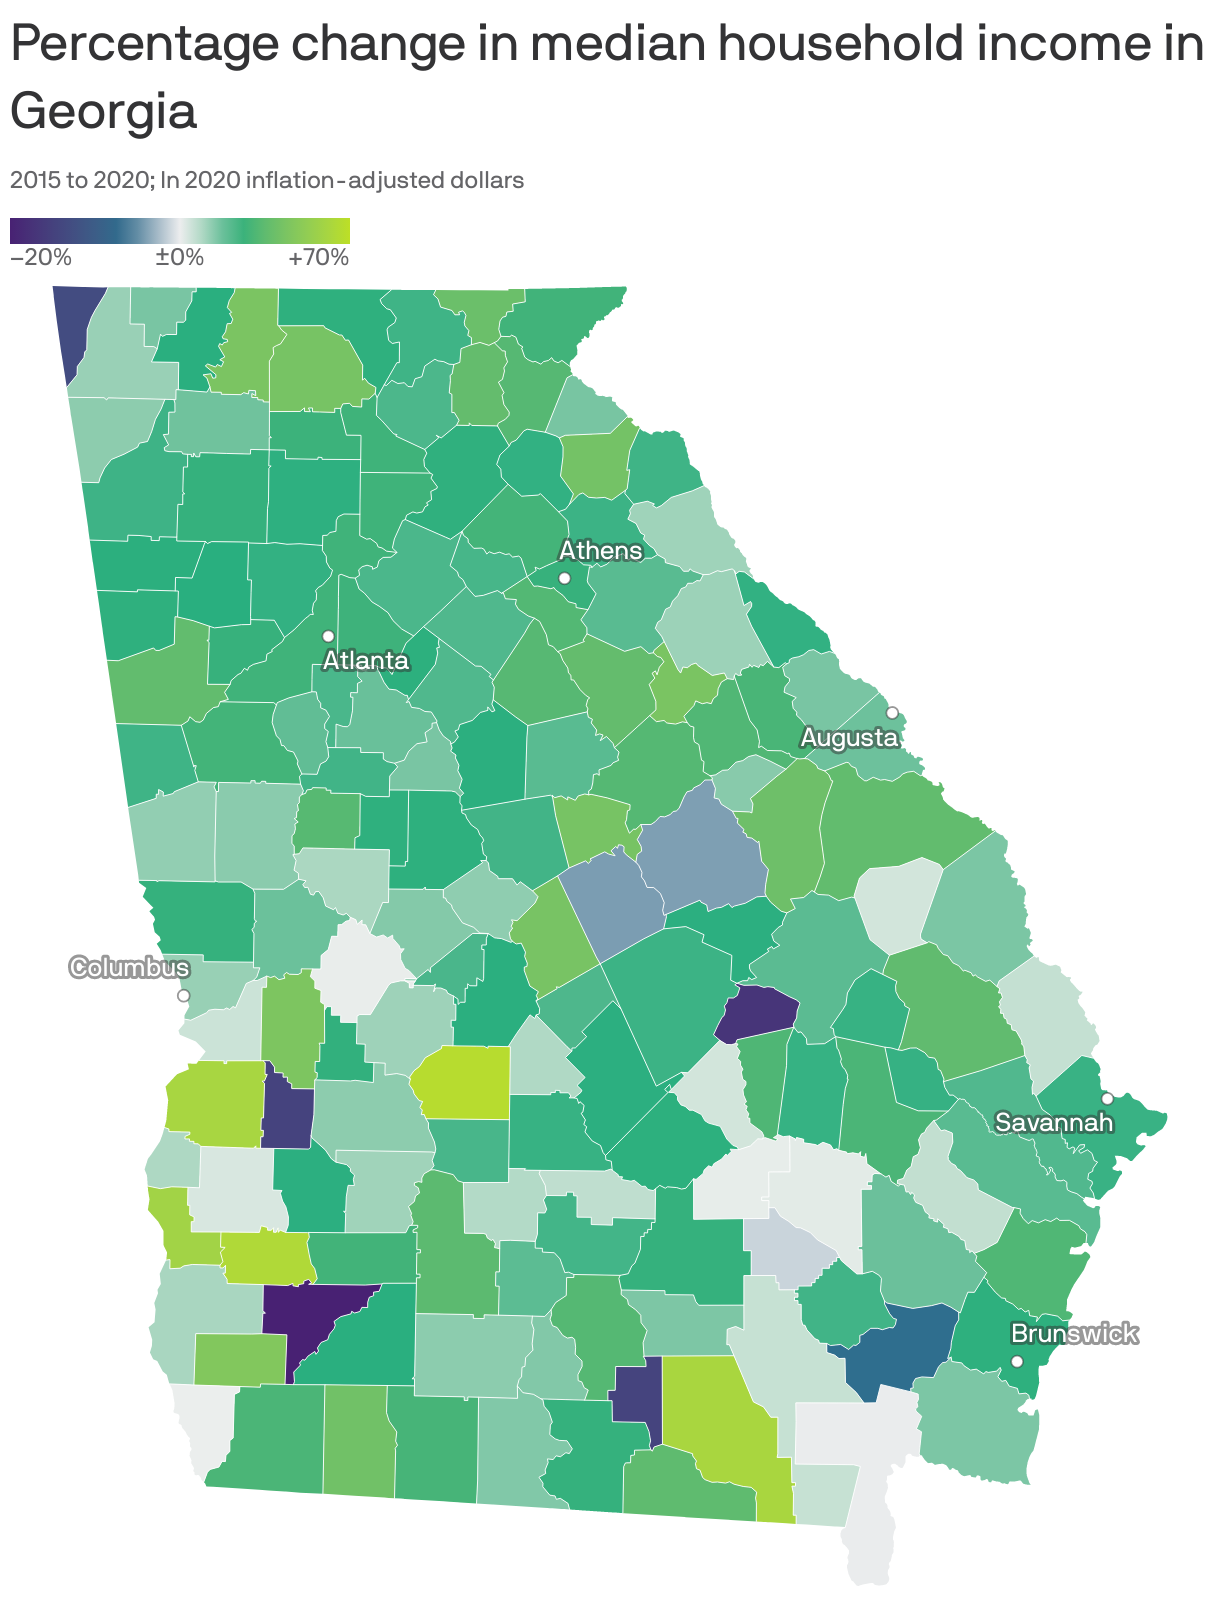 Percentage change in median household income in Georgia